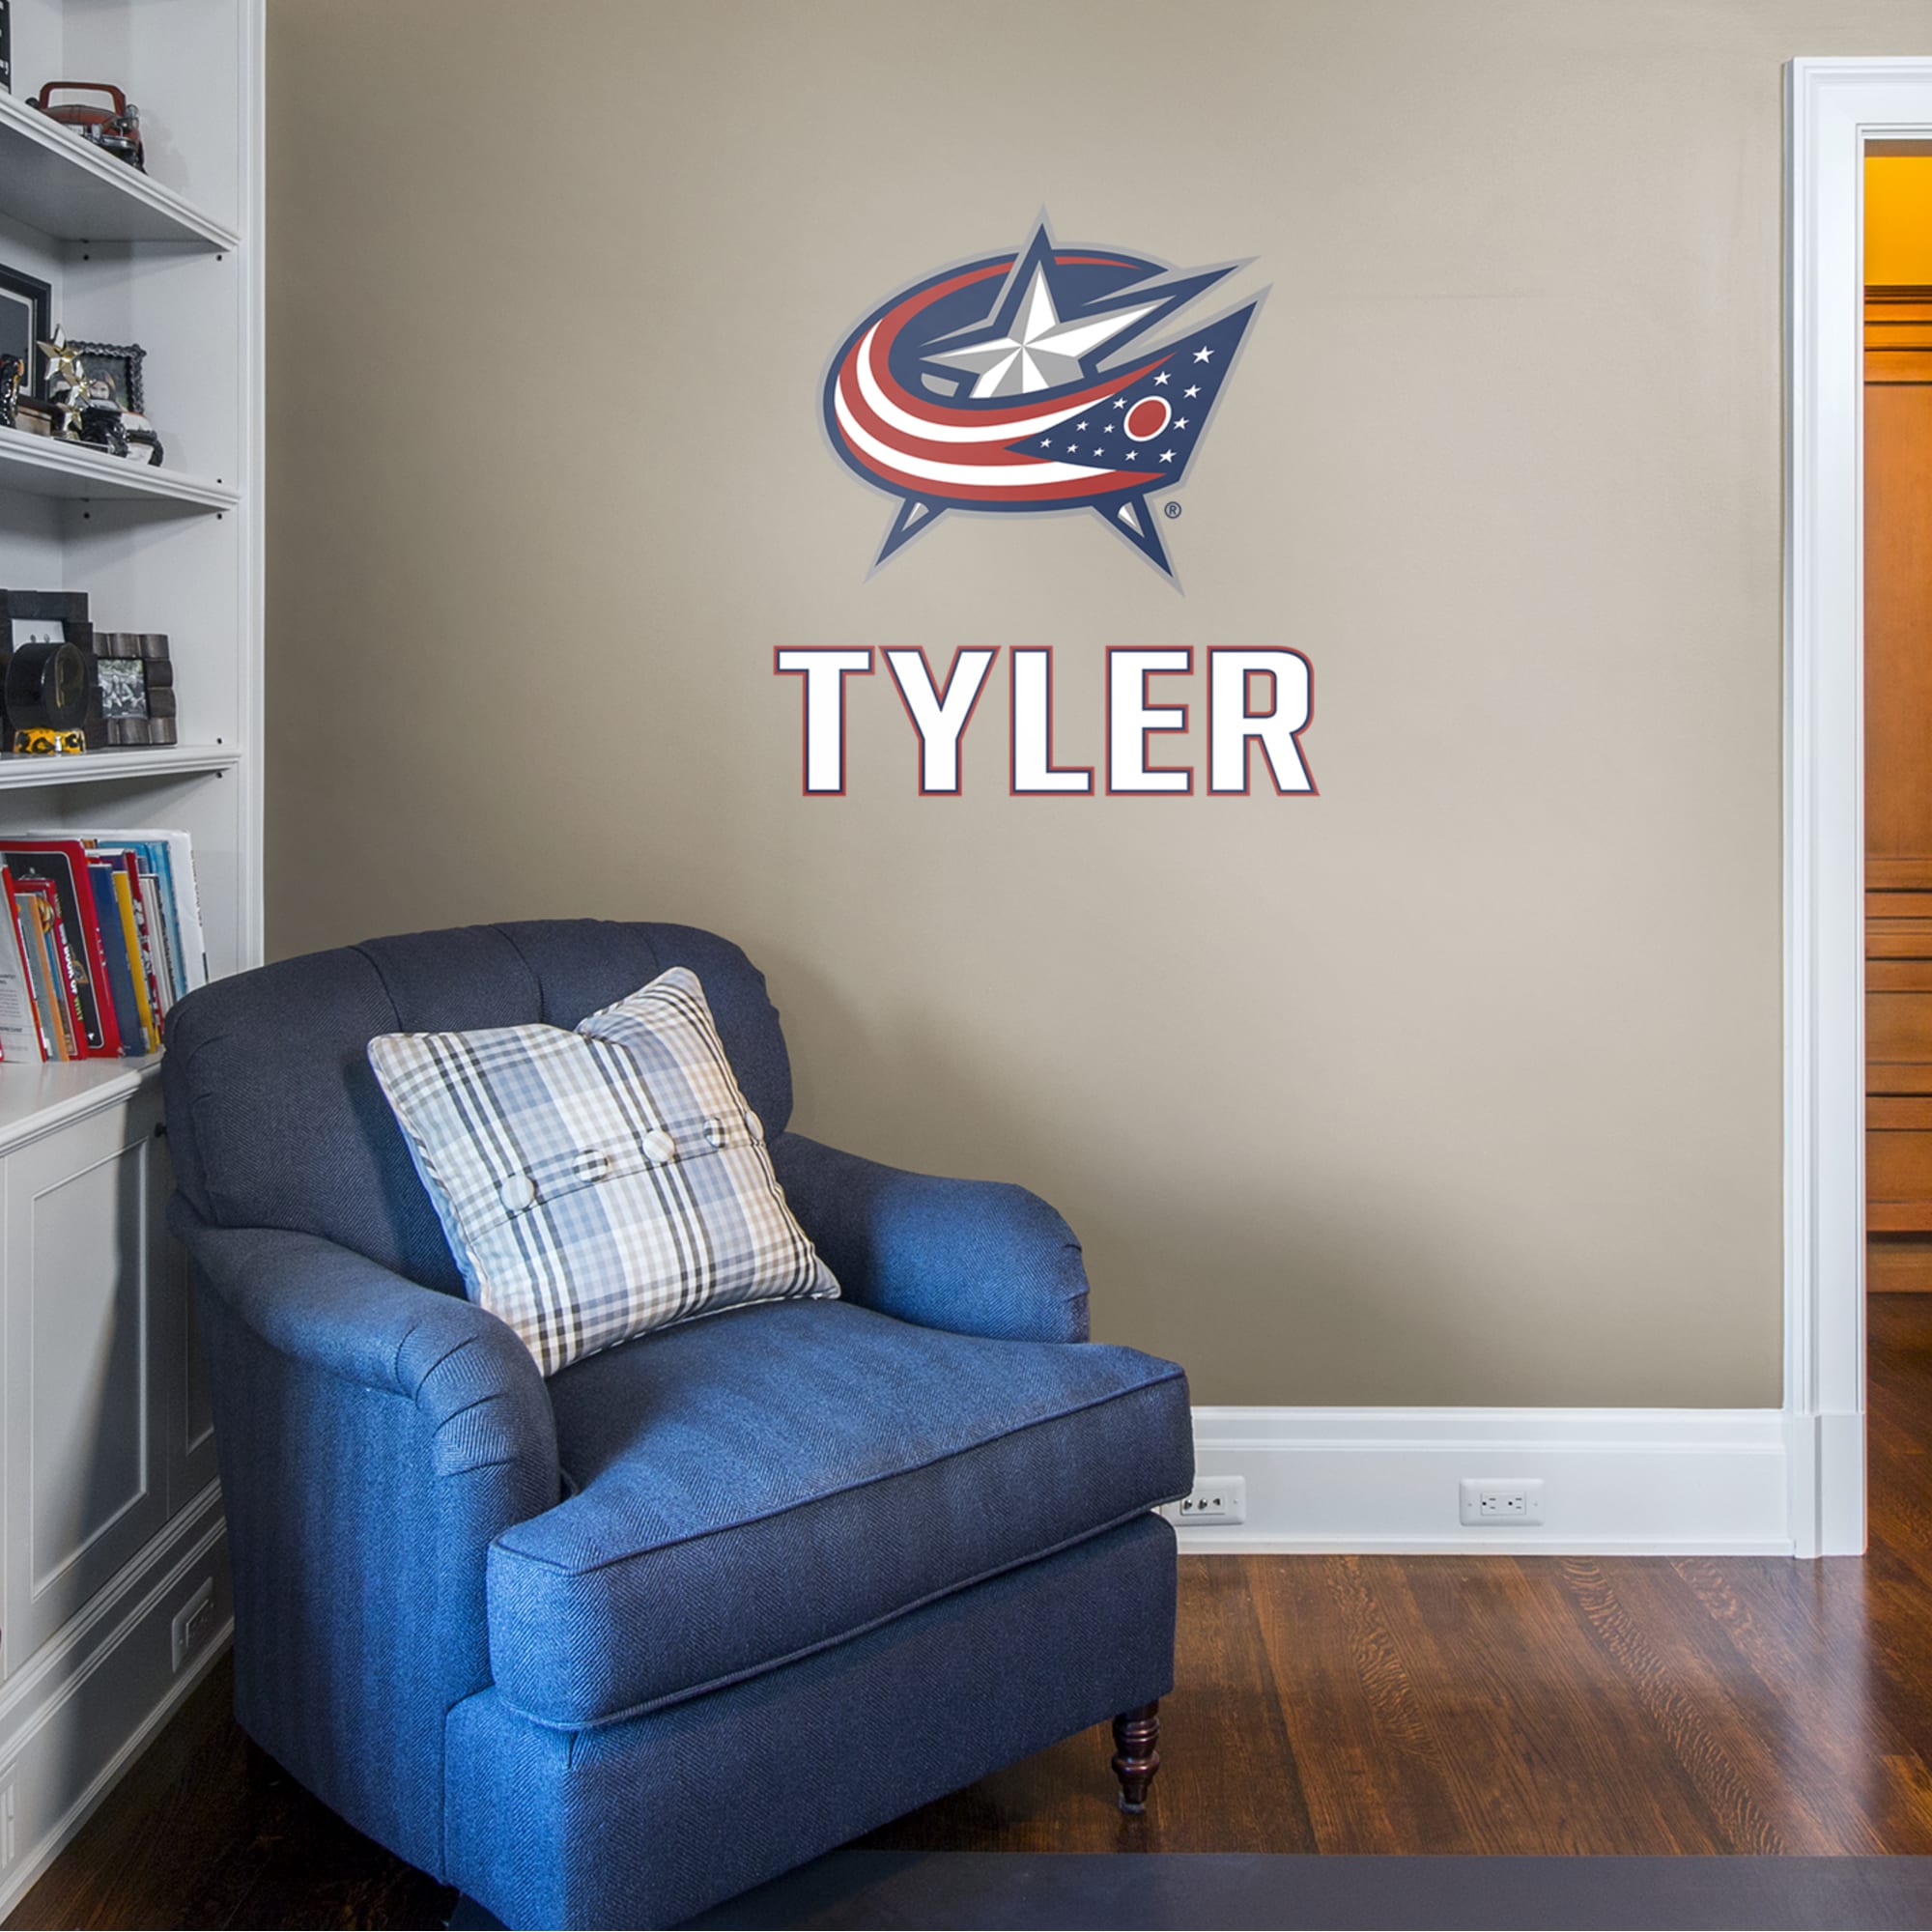 Columbus Blue Jackets: Stacked Personalized Name - Officially Licensed NHL Transfer Decal in White (39.5"W x 52"H) by Fathead |